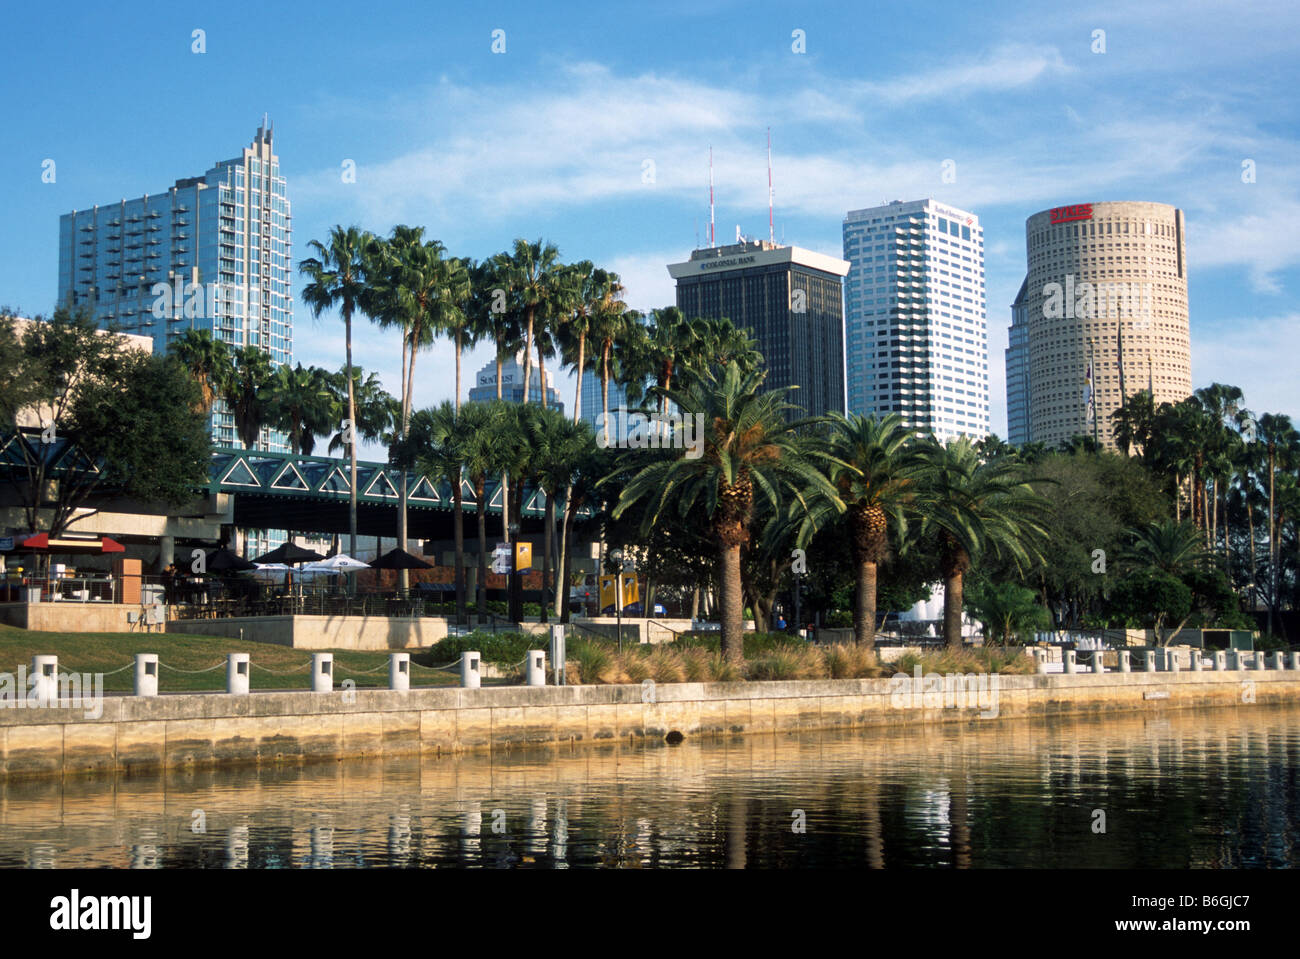 The skyline of downtown Tampa, Florida, U.S.A. rises next to the Hillsborough River. Stock Photo